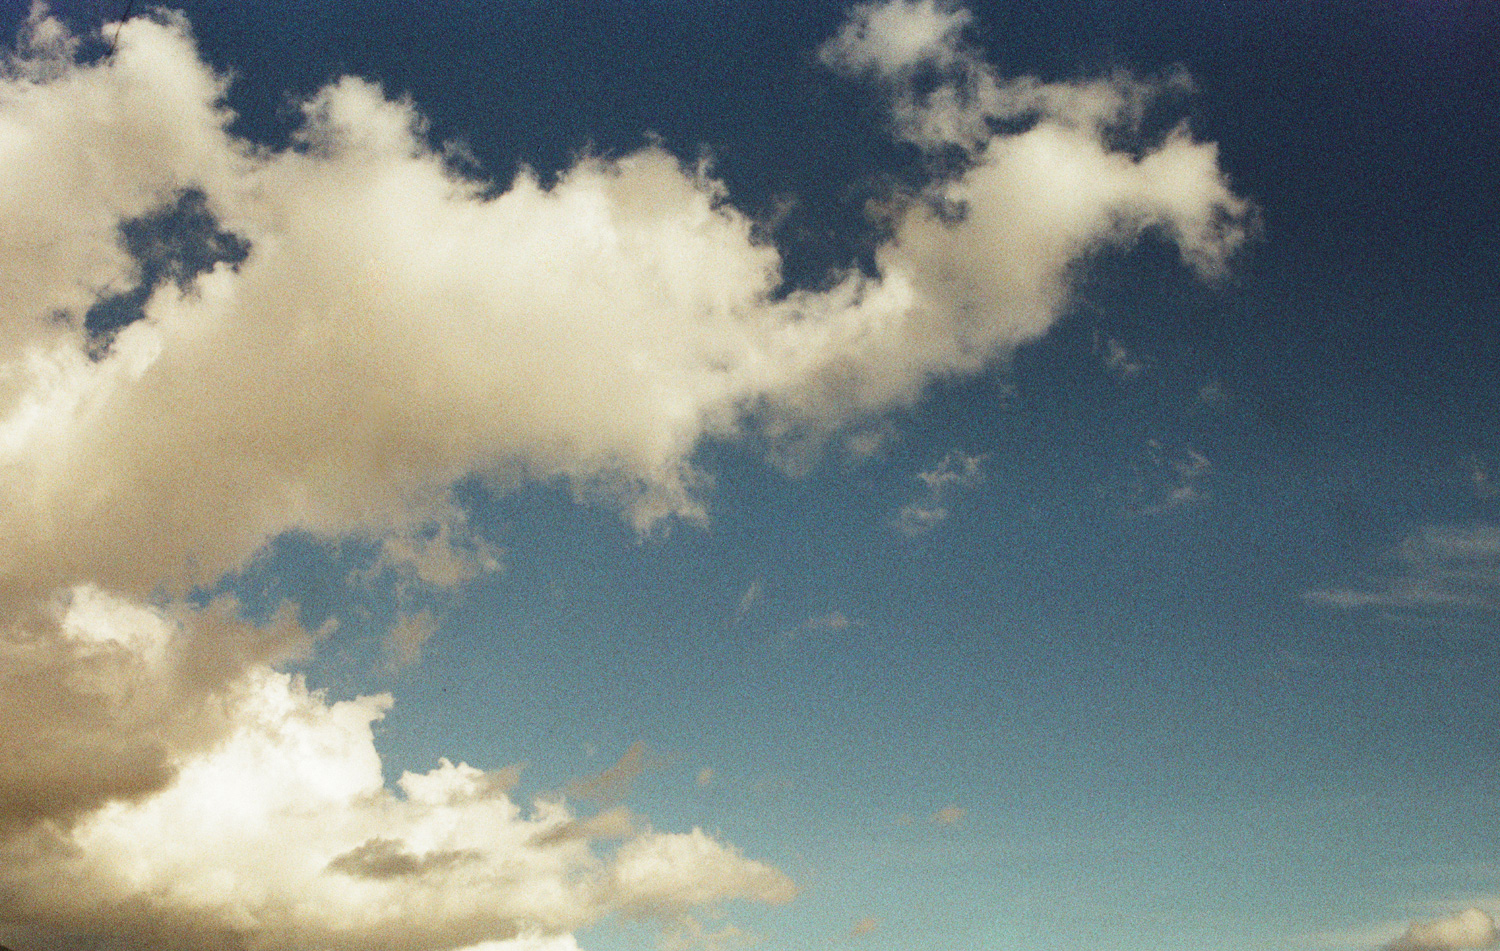 Clouds in blue sky (Pic: Courtesy of Adox)